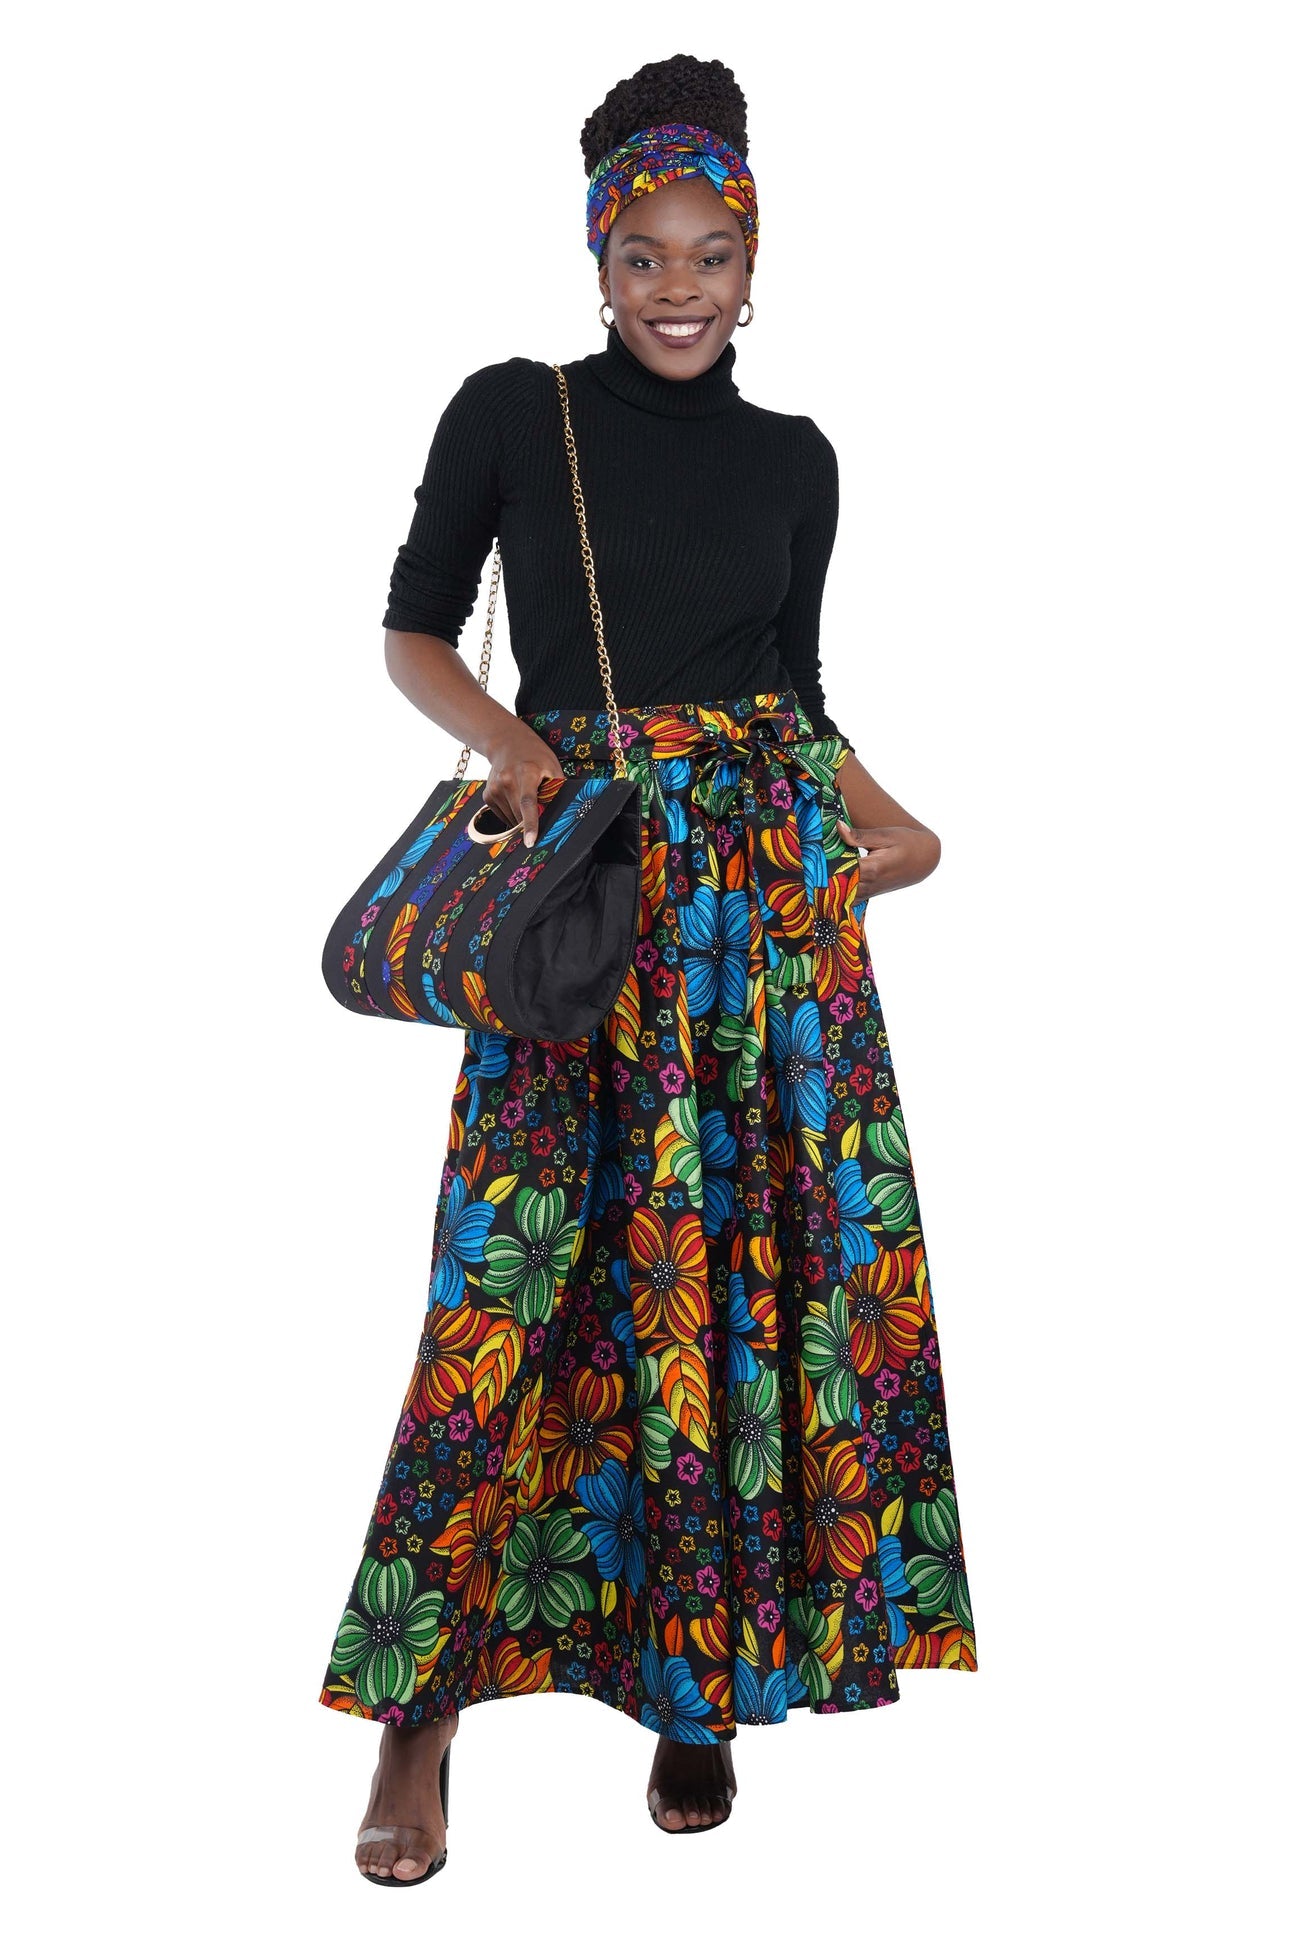 "Pre-Order Traditional Kente Print Maxi Skirt with Matching Purse and Head Wrap - One Size with Elastic Waistband"